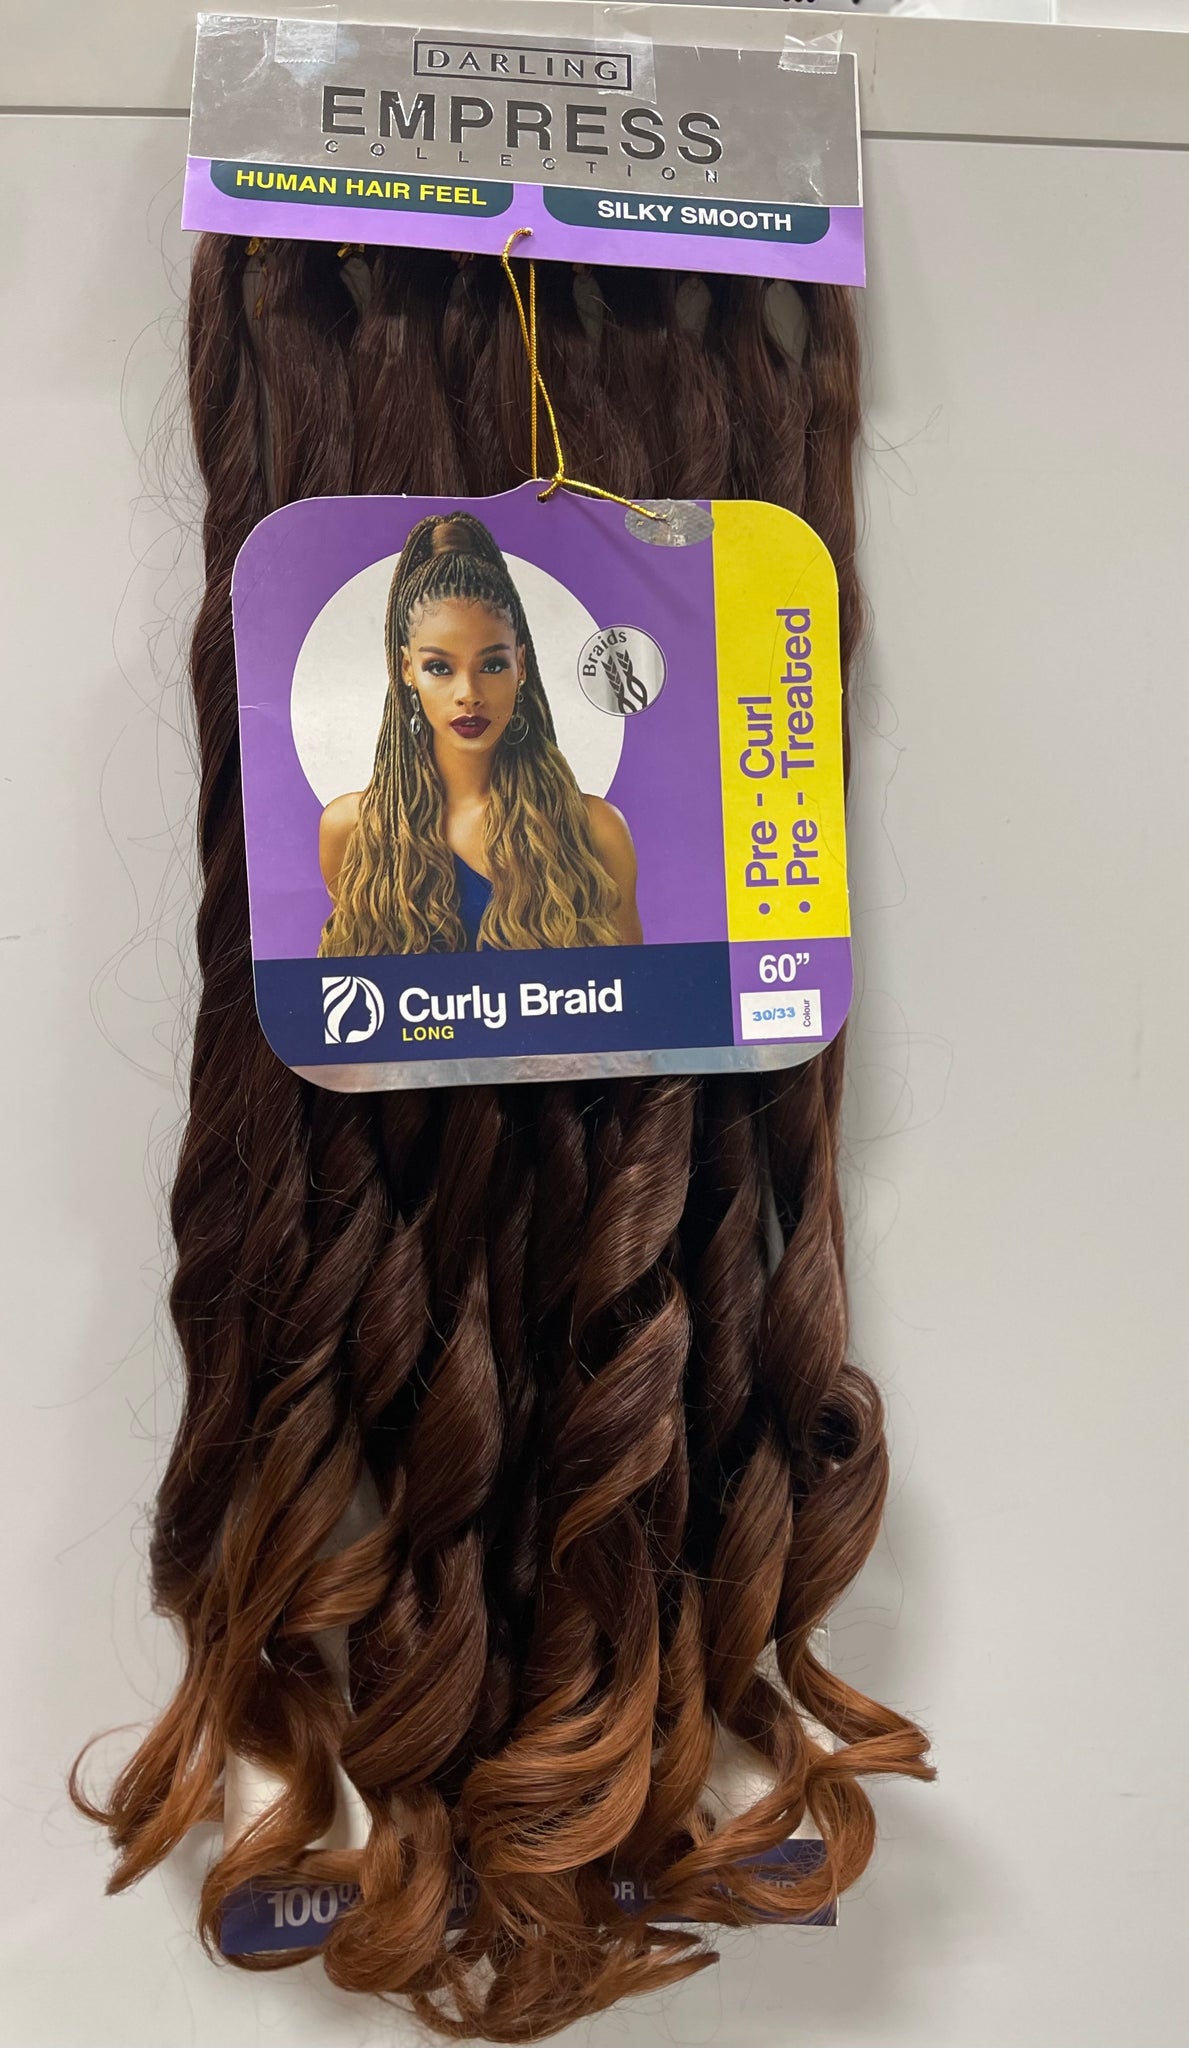 Darling Empress Collection Curly Braid - 6 Pack multi-Pack - 60 – Pure n  Tru Beauty Supply